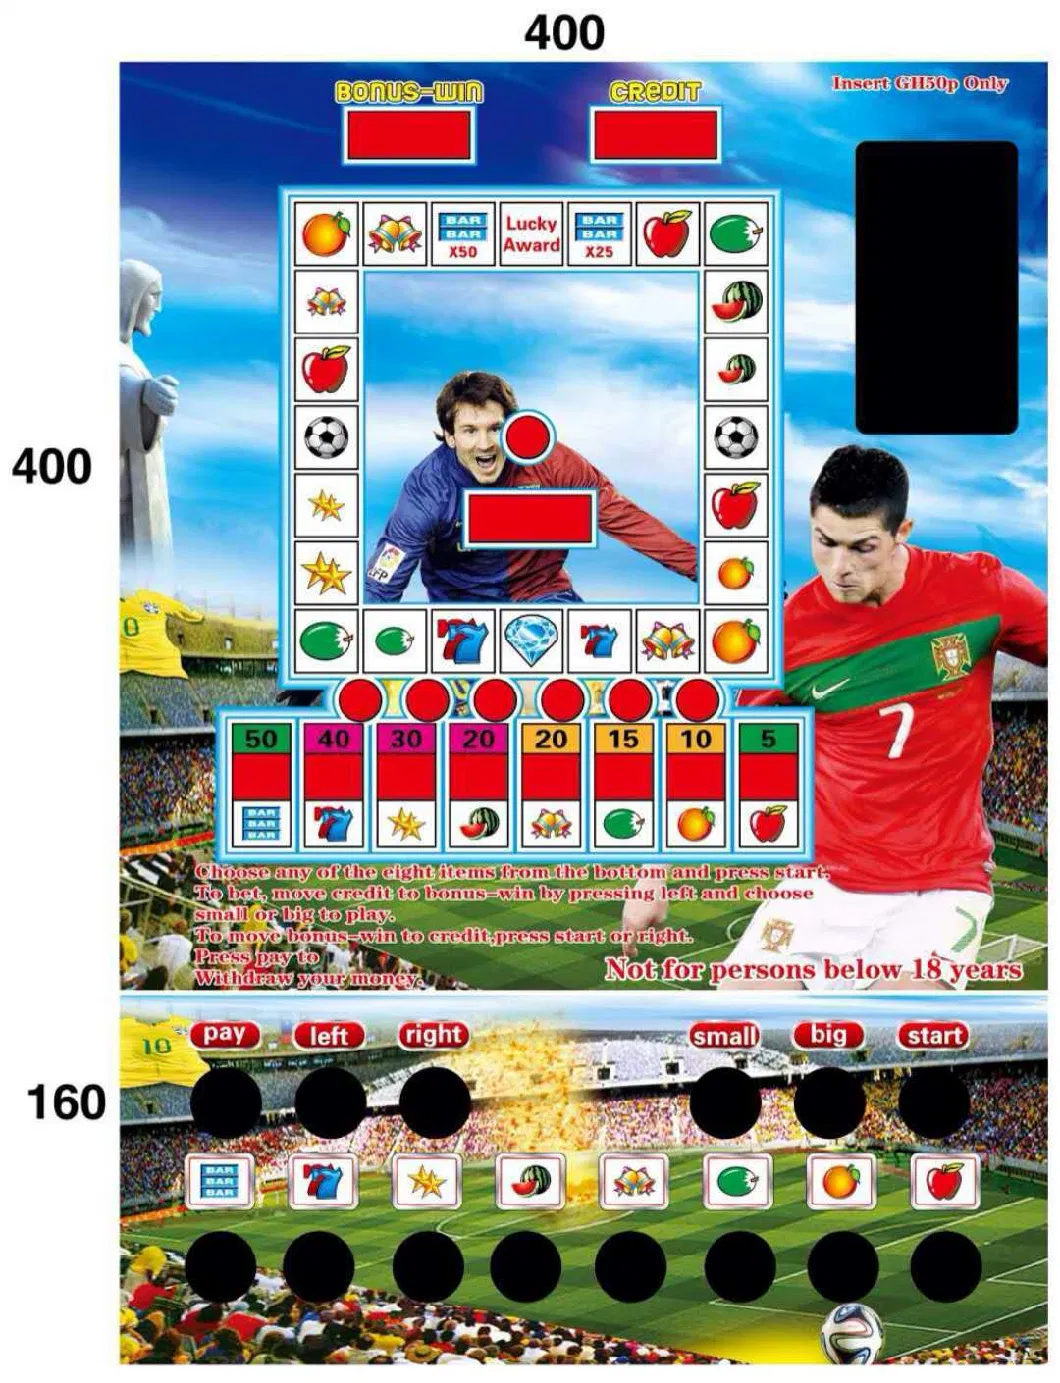 The World Cup Slot Casino Gambling Arcade Game Machines Popular in Africa